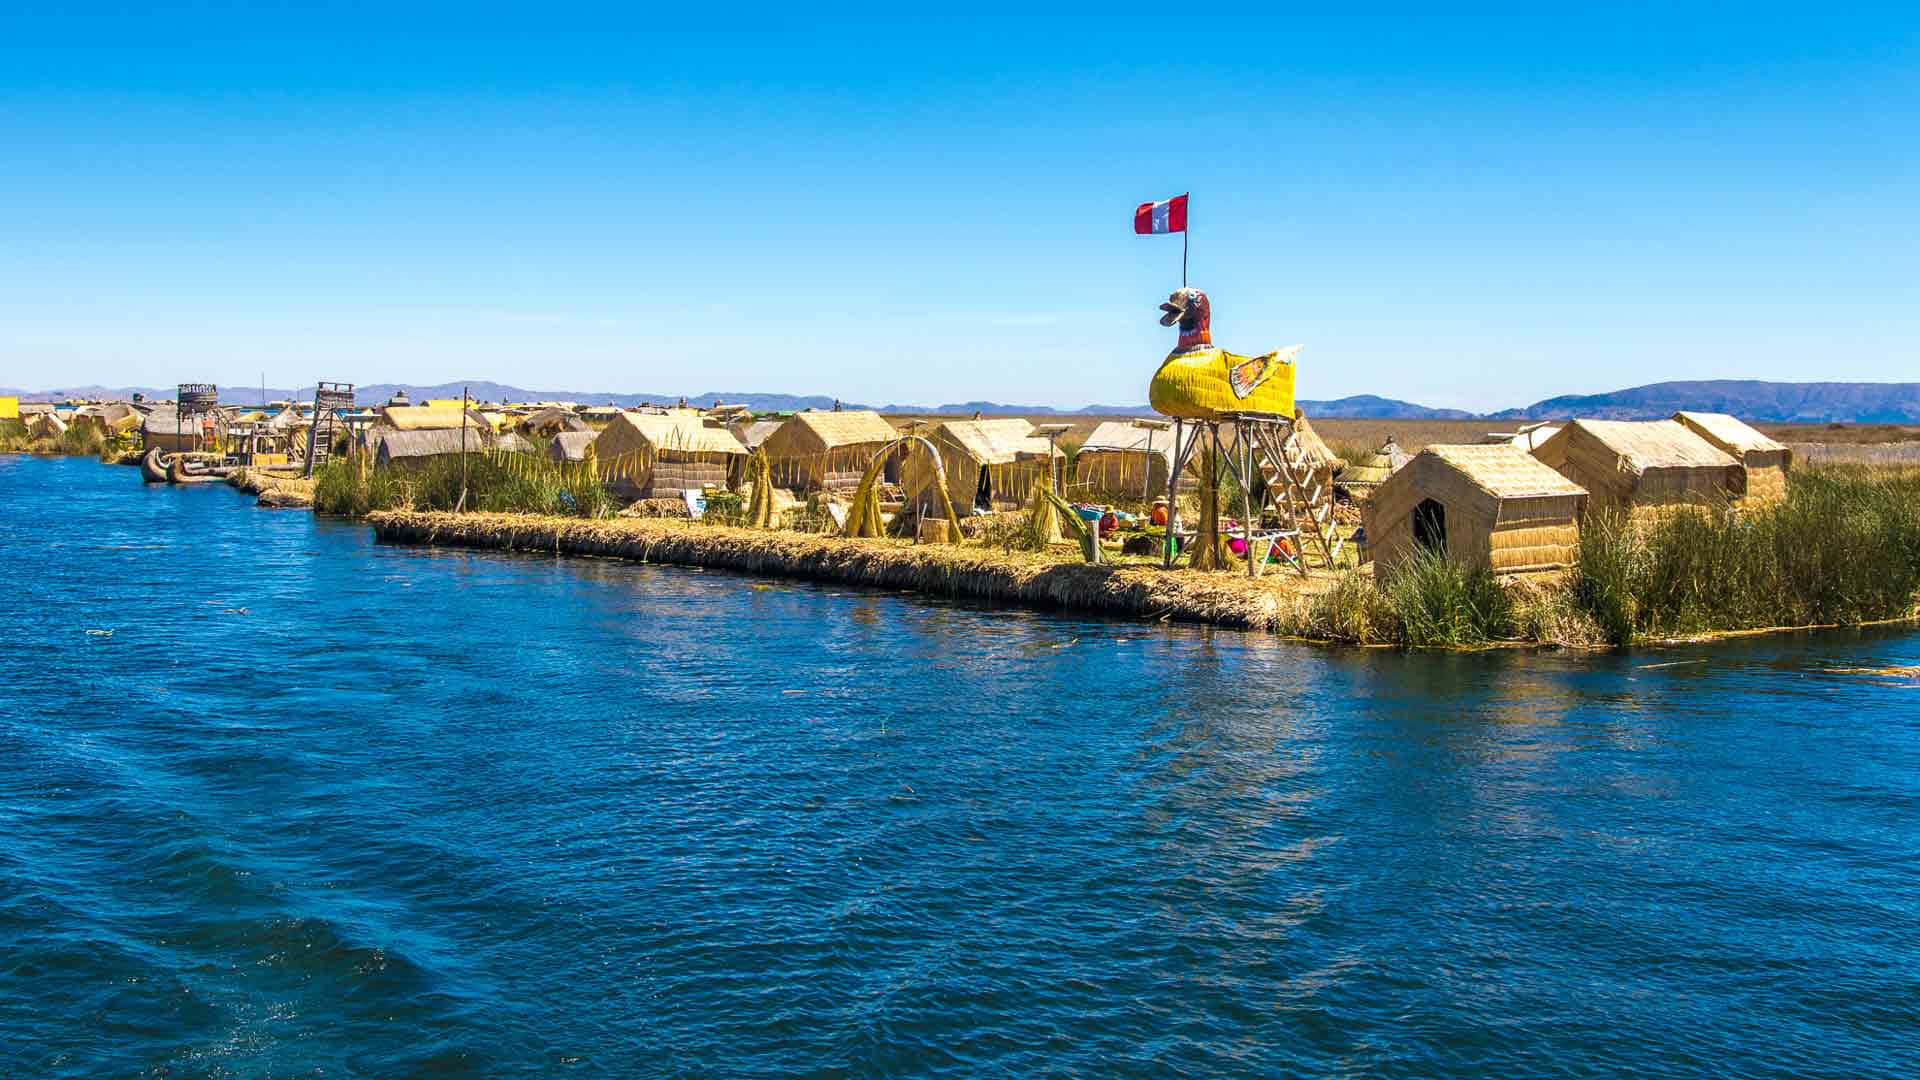 Indigenous community within the breathtaking environment of Lake Titicaca. Wallpaper